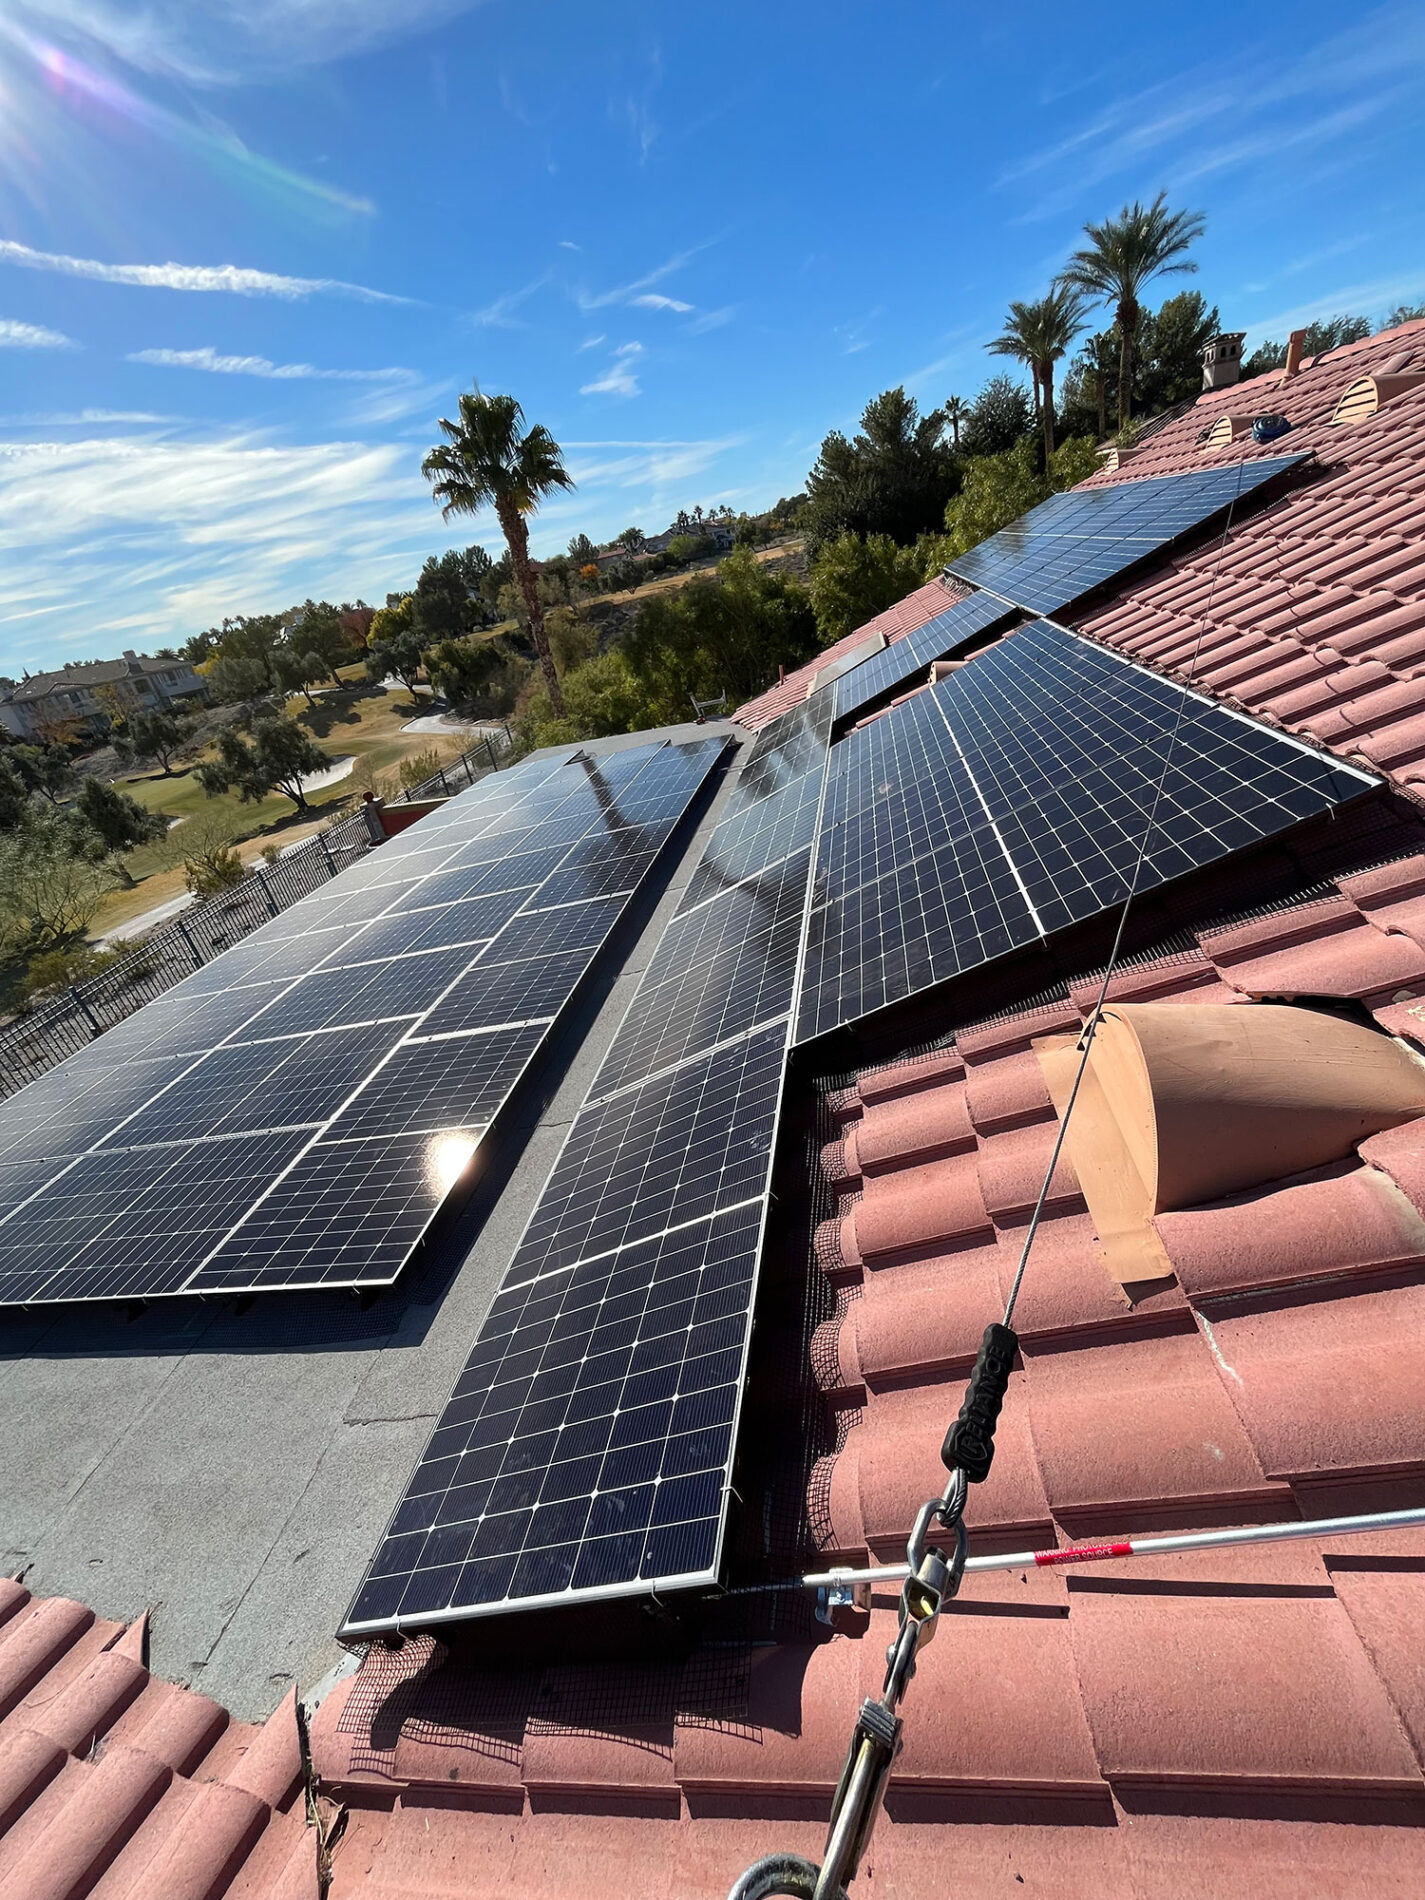 Sol-Up, solar services, MacDonald Ranch, Southern Nevada, sunshine, renewable energy, sustainable living, carbon footprint reduction, energy efficiency